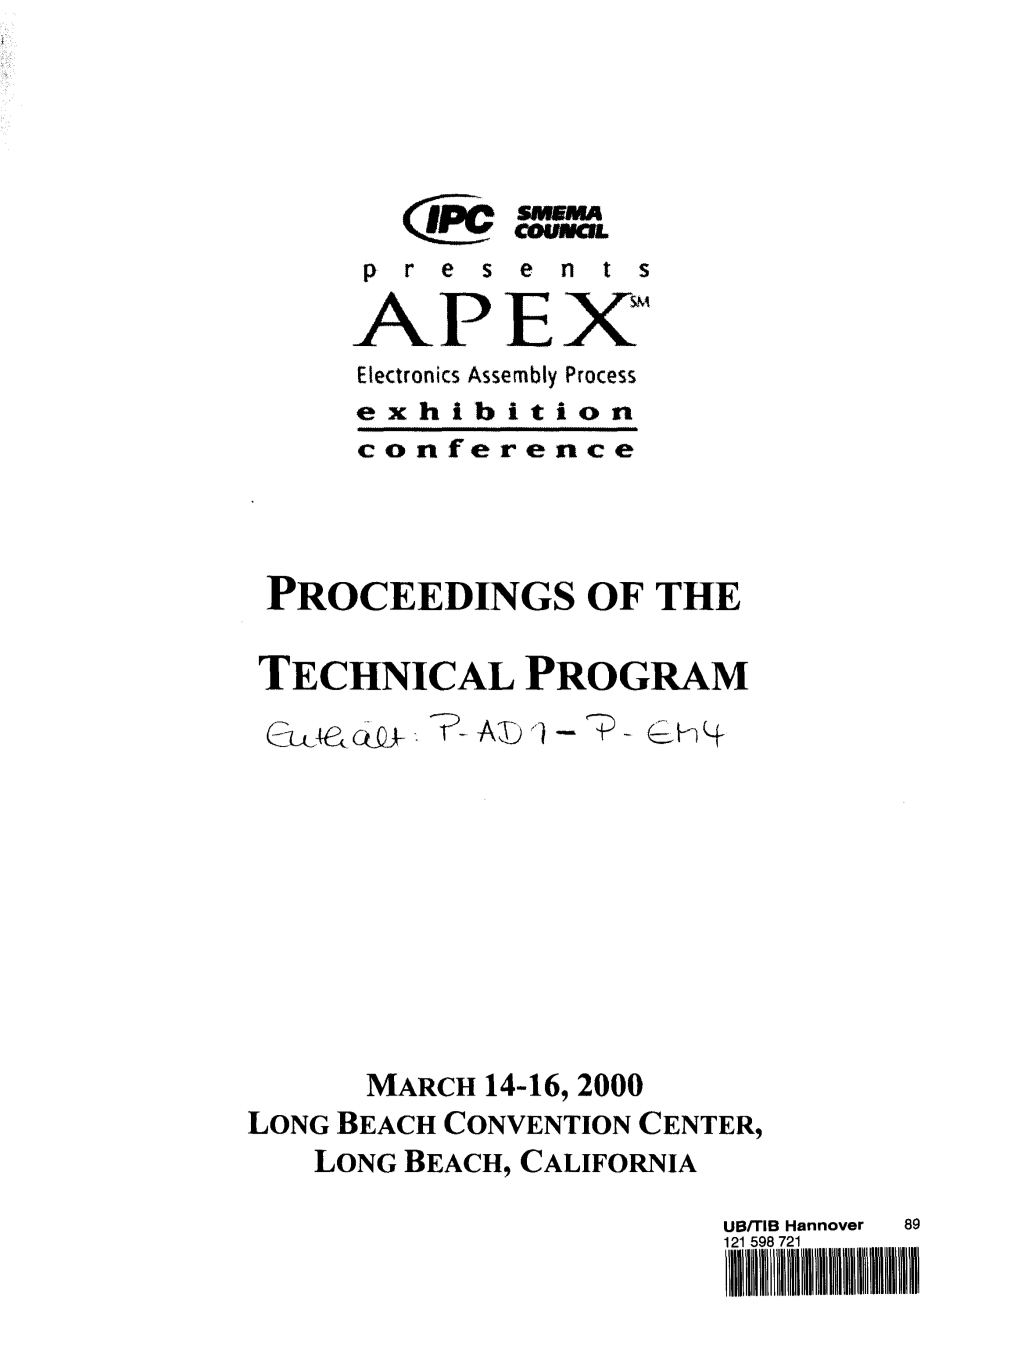 APEX" Electronics Assembly Process Exhibition Conference